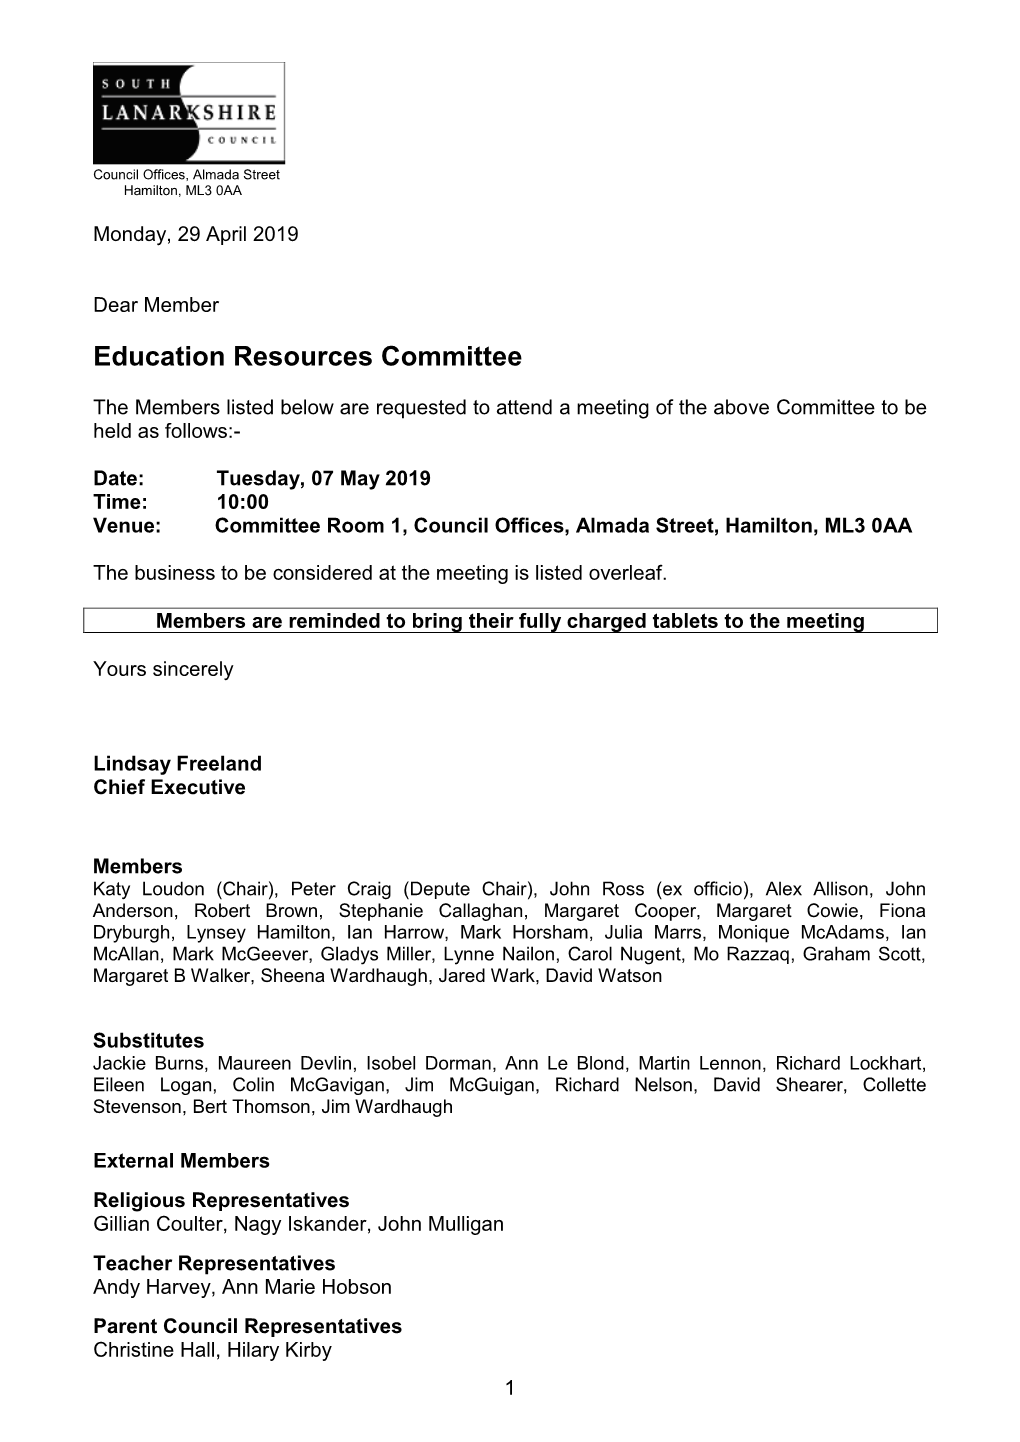 Education Resources Committee